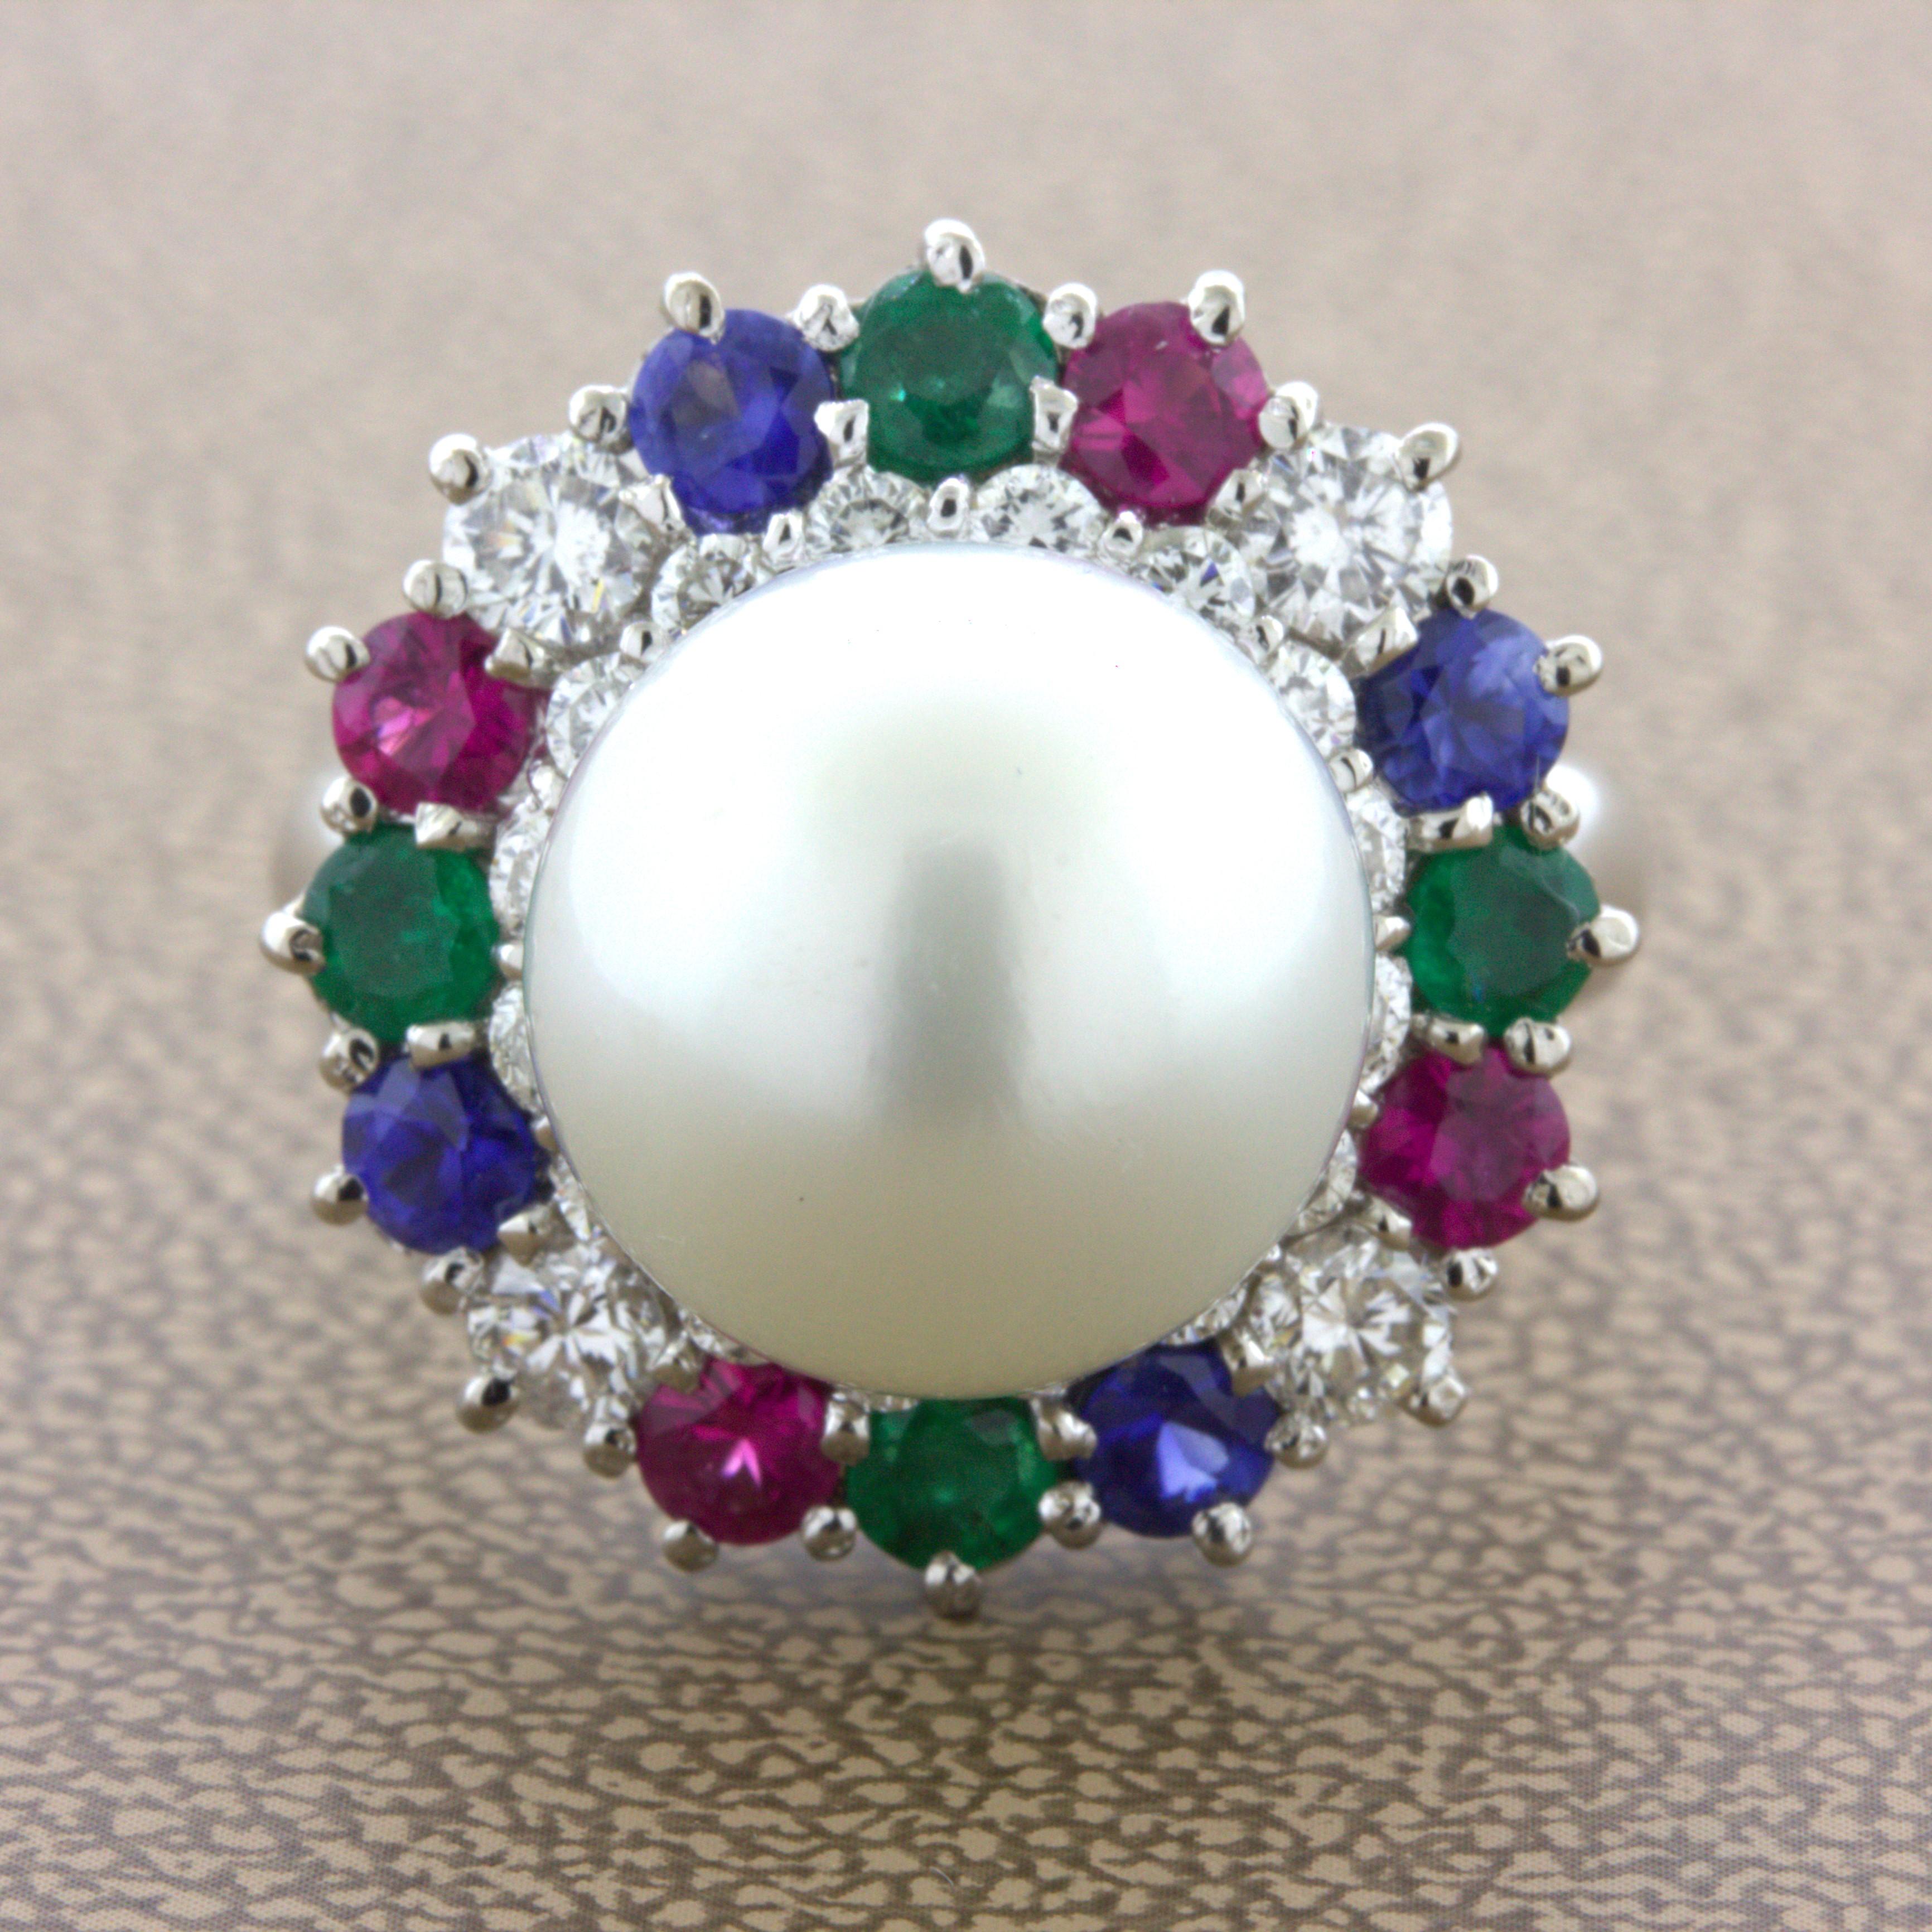 A lovely platinum made ring full of sparkle and color! It features a 13mm south sea pearl with a soft glowing white color. It is surrounded by sparkles and colors, 1.17 carats of round brilliant-cut diamonds along with 1.81 carats total of rubies,